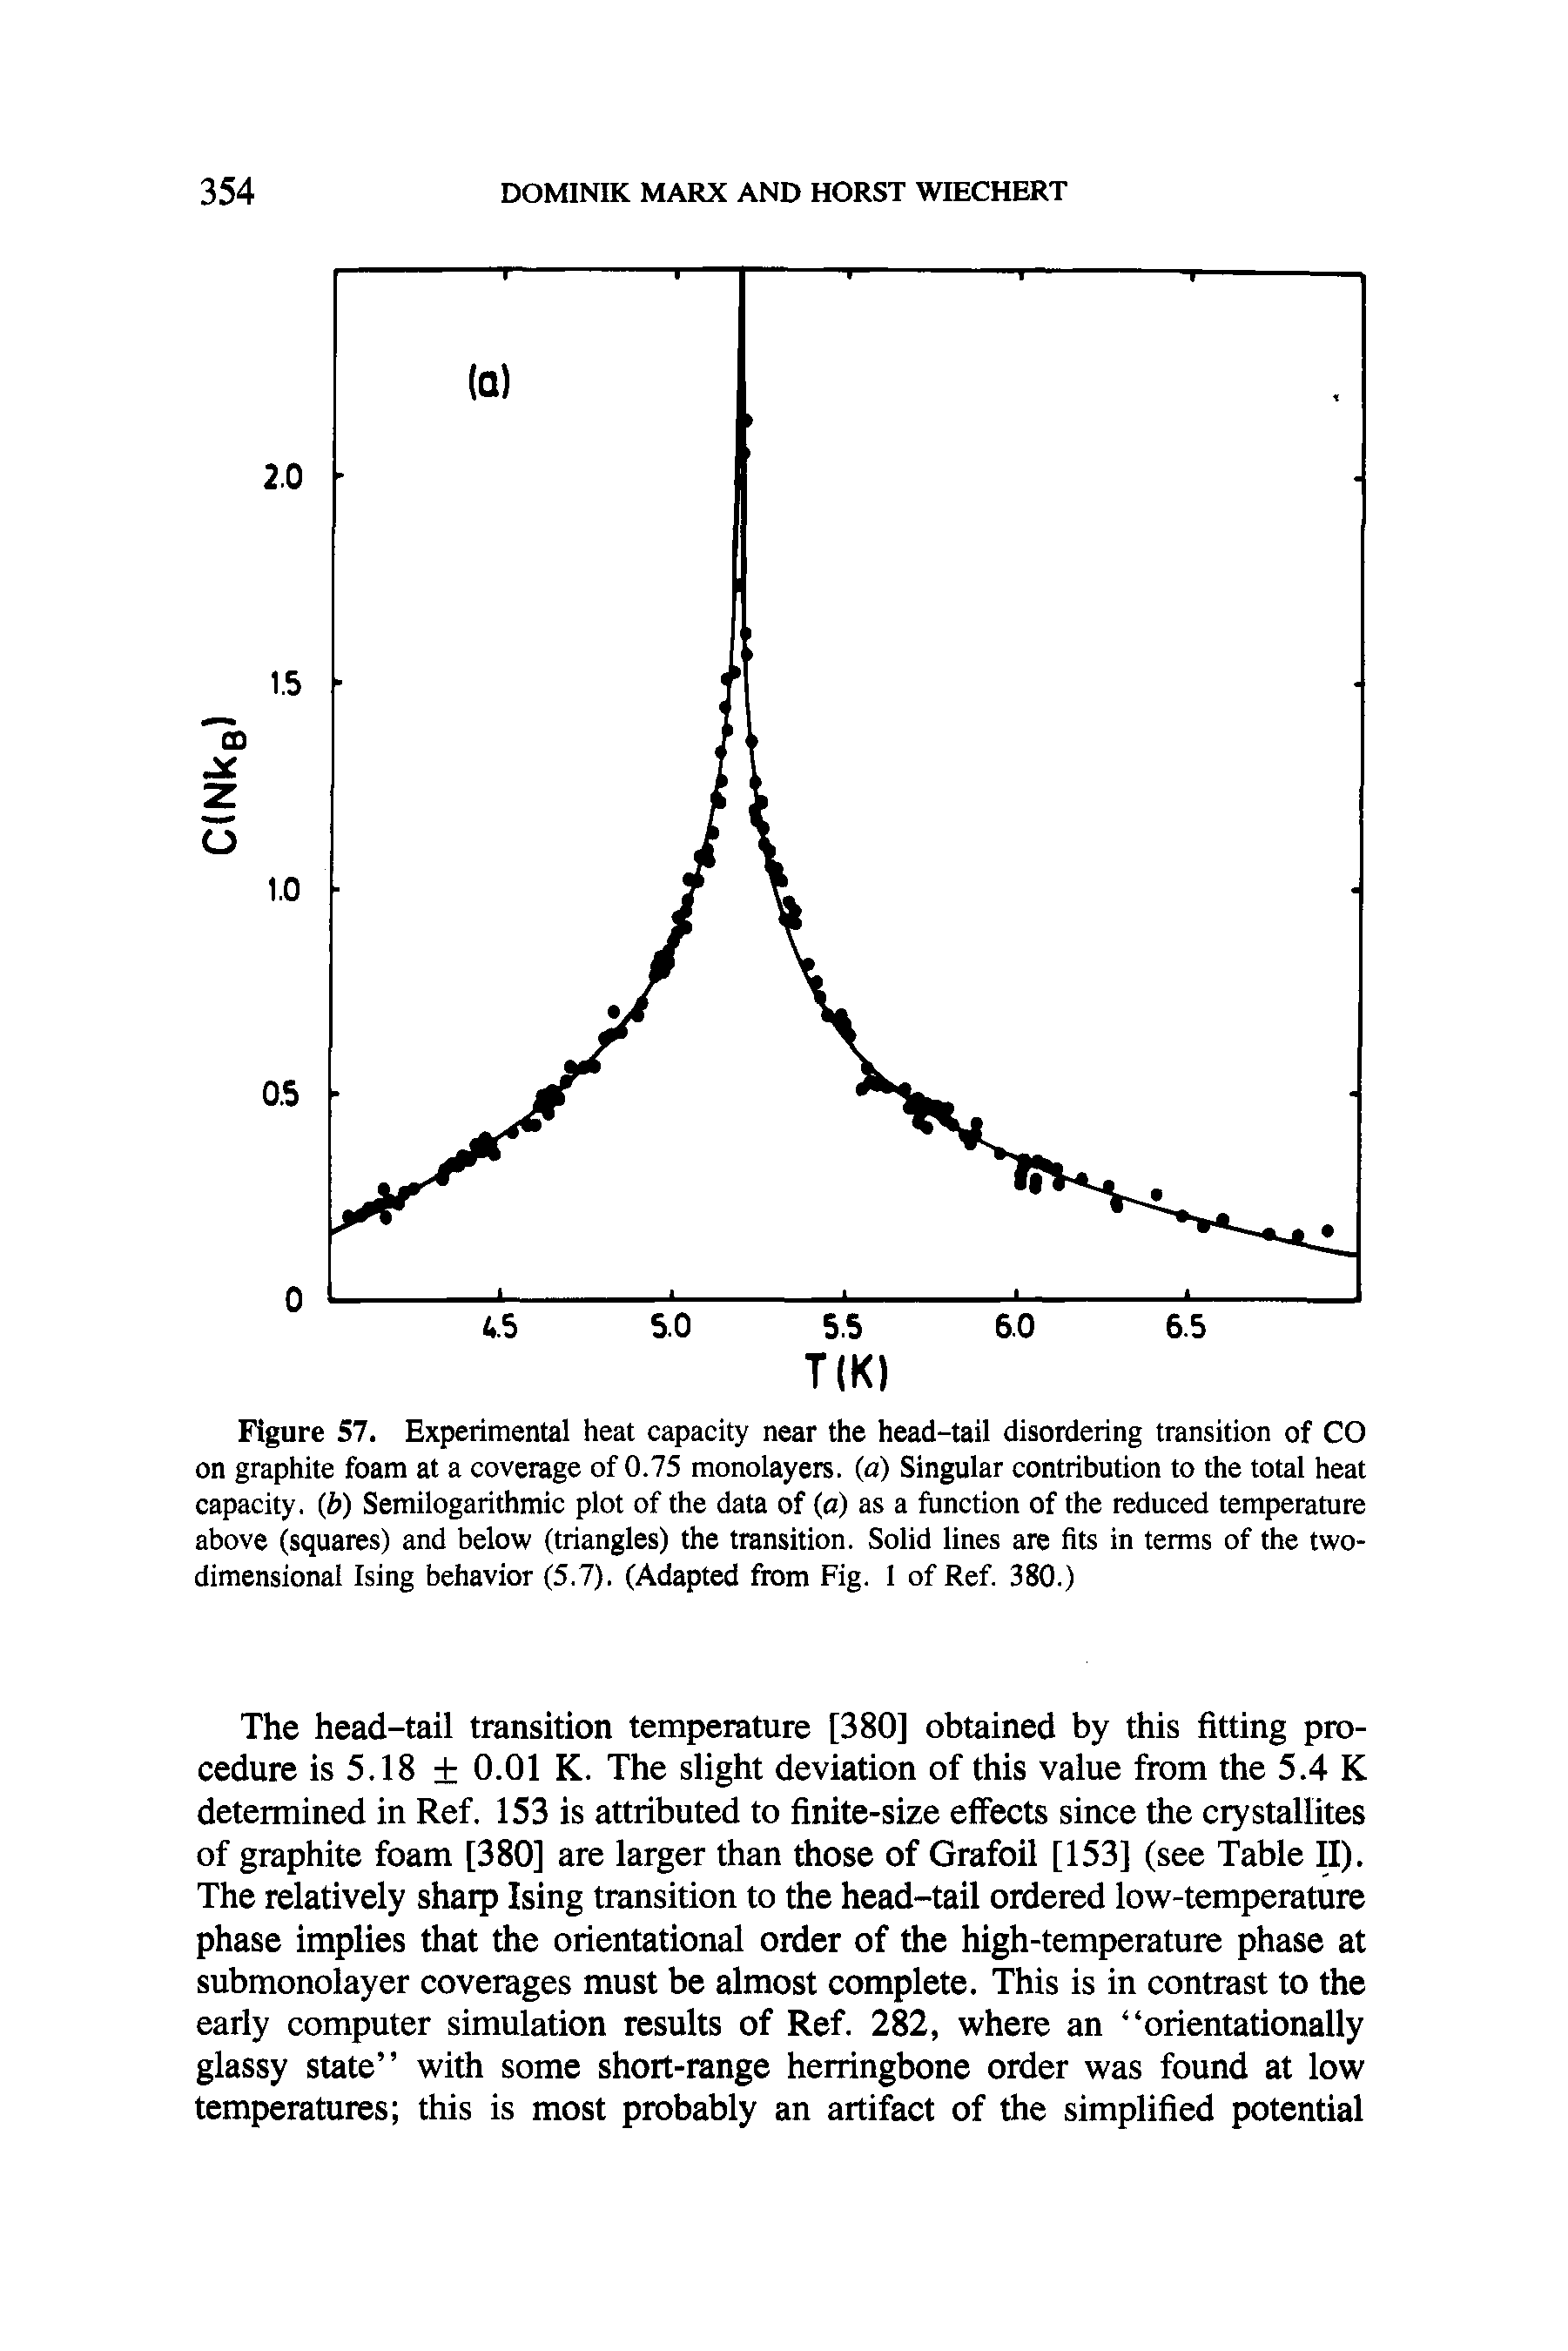 Figure 57. Experimental heat capacity near the head-tail disordering transition of CO on graphite foam at a coverage of 0.75 monolayers, (a) Singular contribution to the total heat capacity, (b) Semilogarithmic plot of the data of (a) as a function of the reduced temperature above (squares) and below (triangles) the transition. Solid lines are fits in terms of the two-dimensional Ising behavior (5.7). (Adapted from Fig. I of Ref. 380.)...